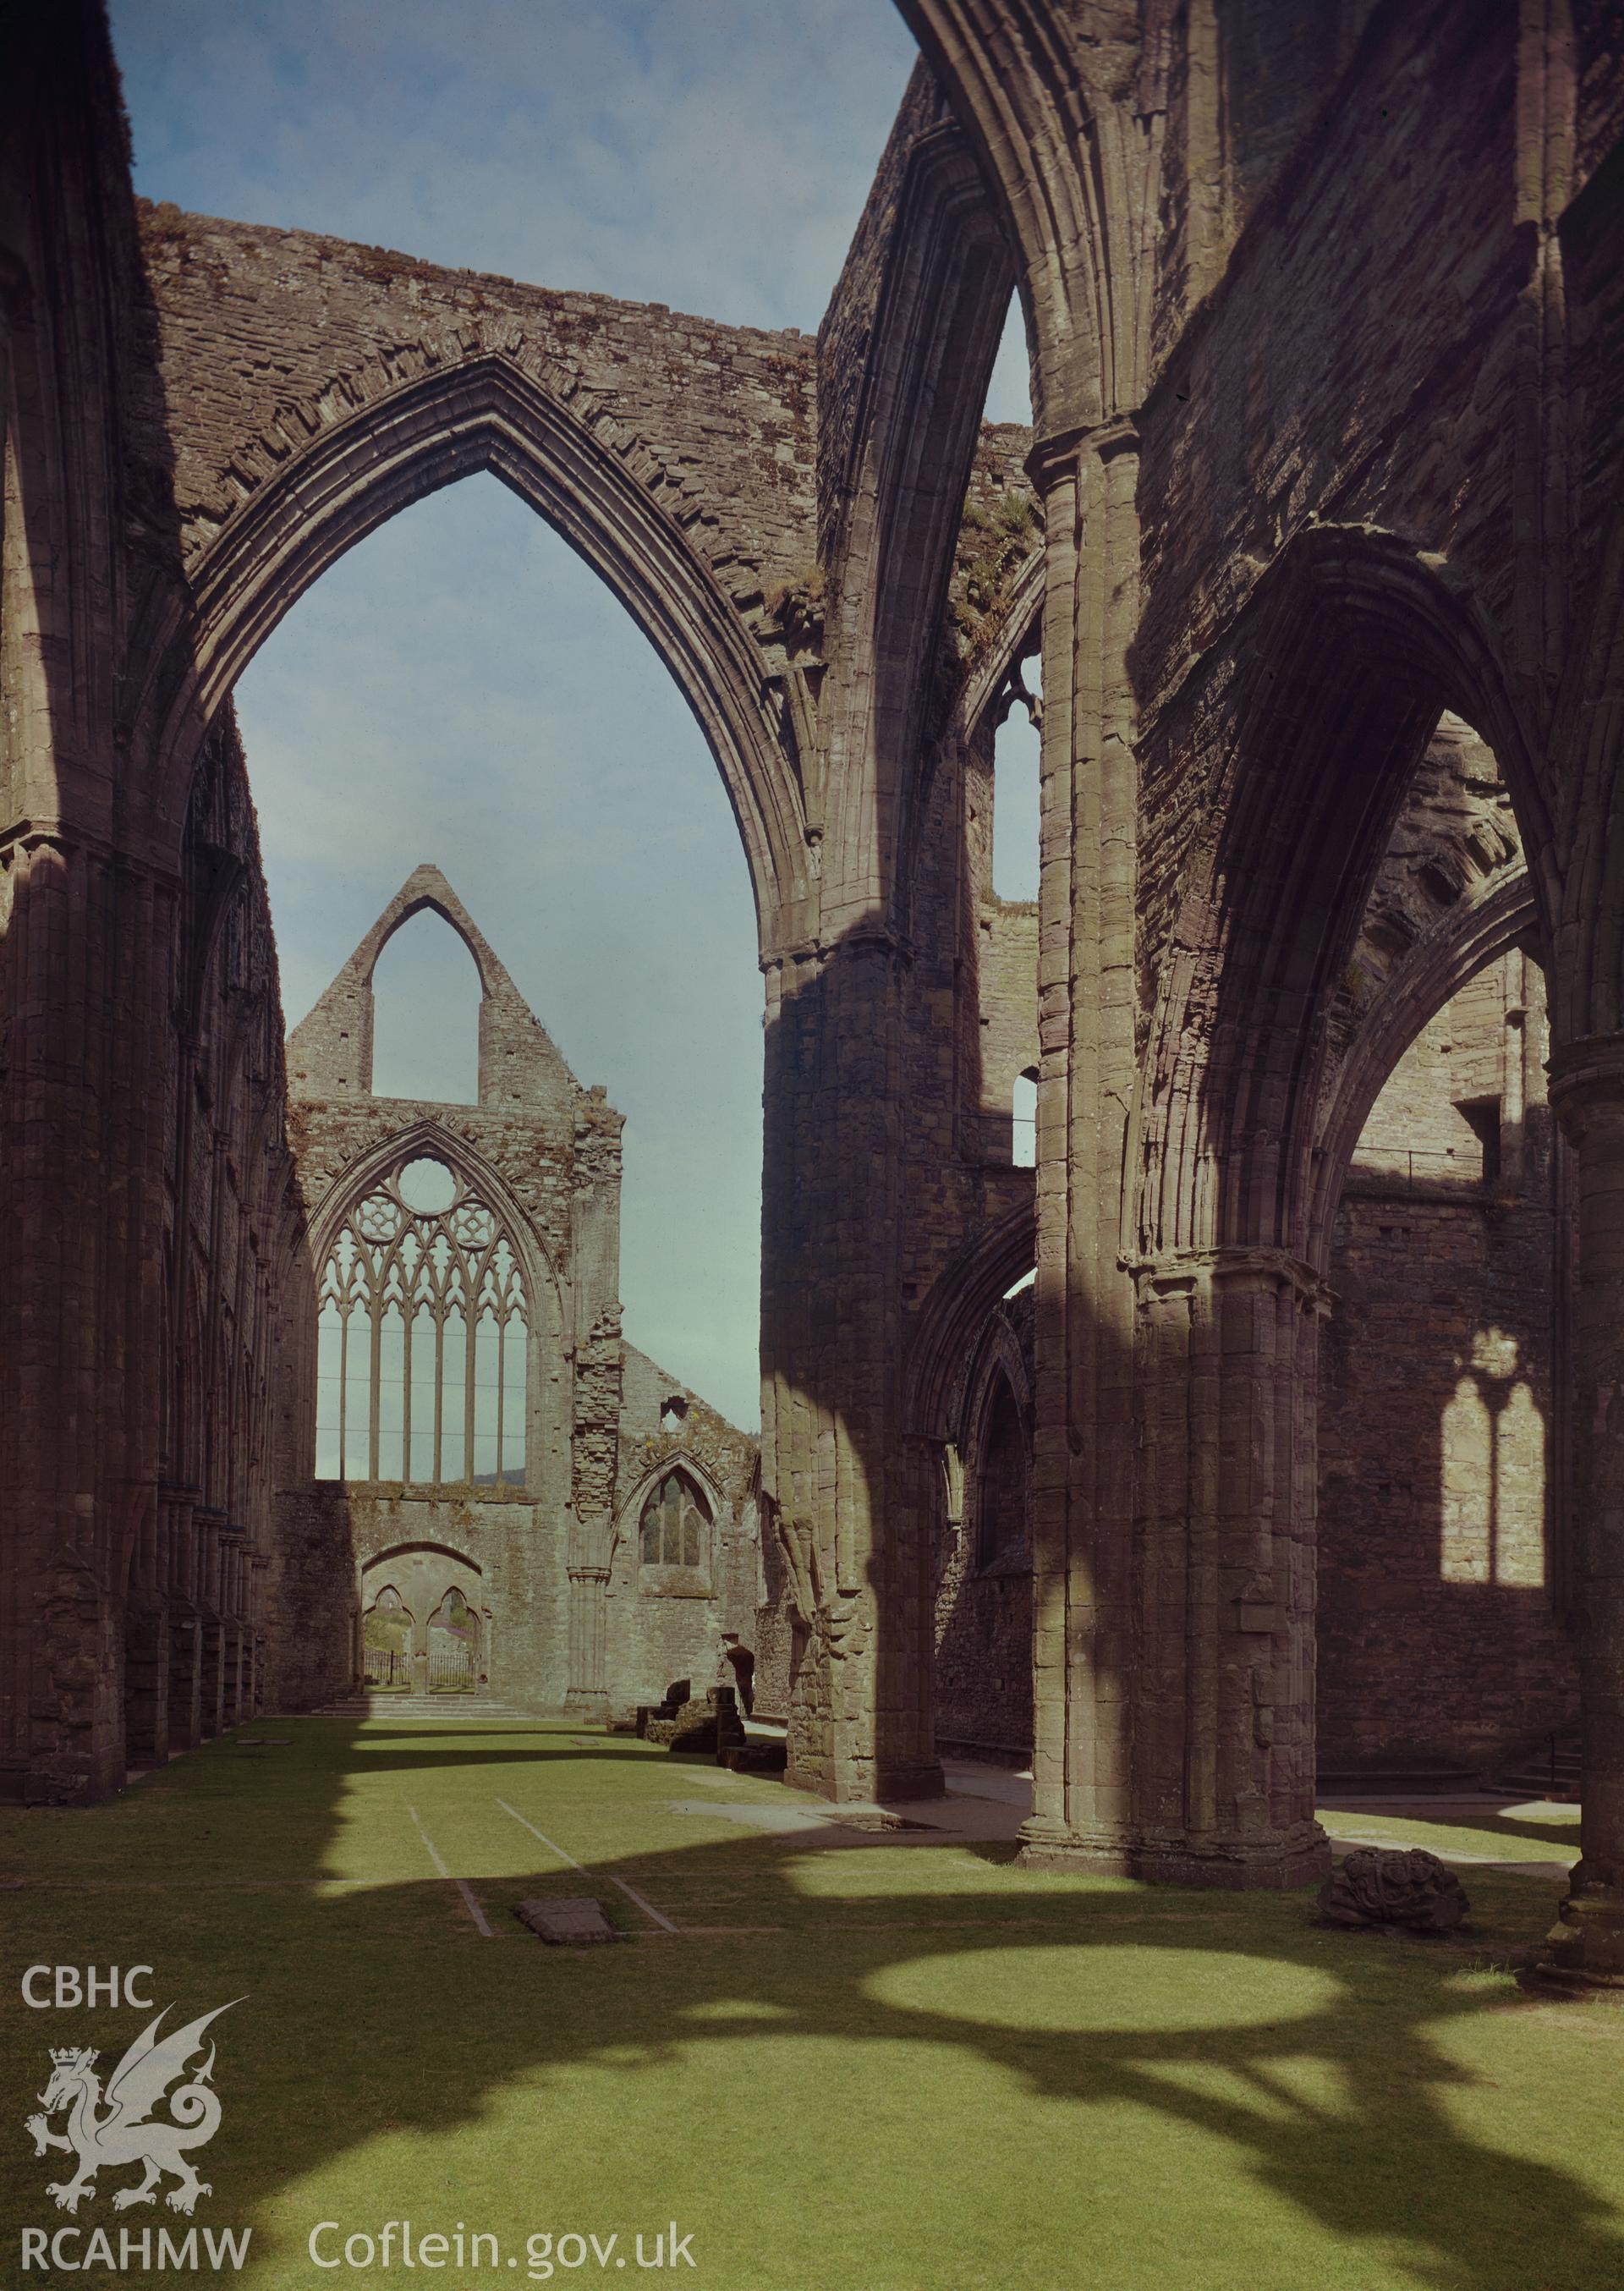 D.O.E. colour transparency of Tintern Abbey: interior view, showing the Nave.